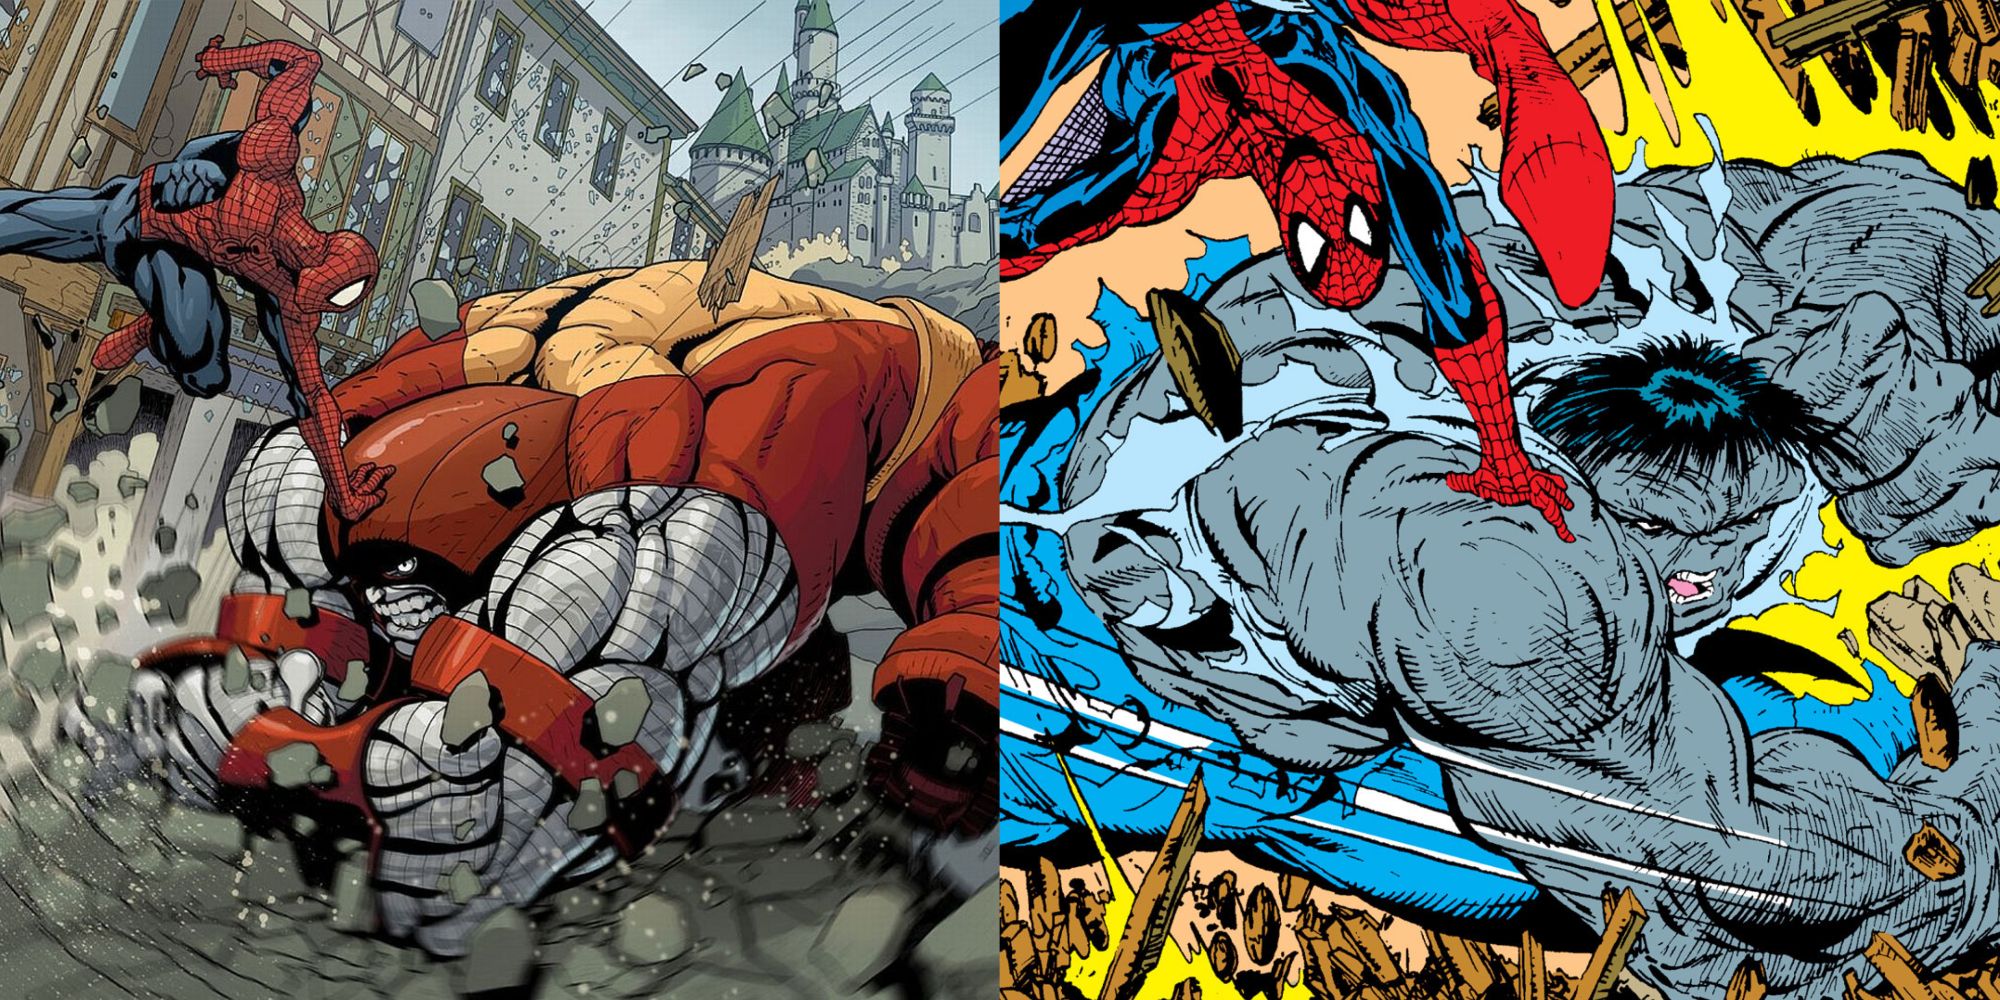 Split image of Spider-Man fighting Colossus as Juggernaut and the Gray Hulk from Marvel Comics.